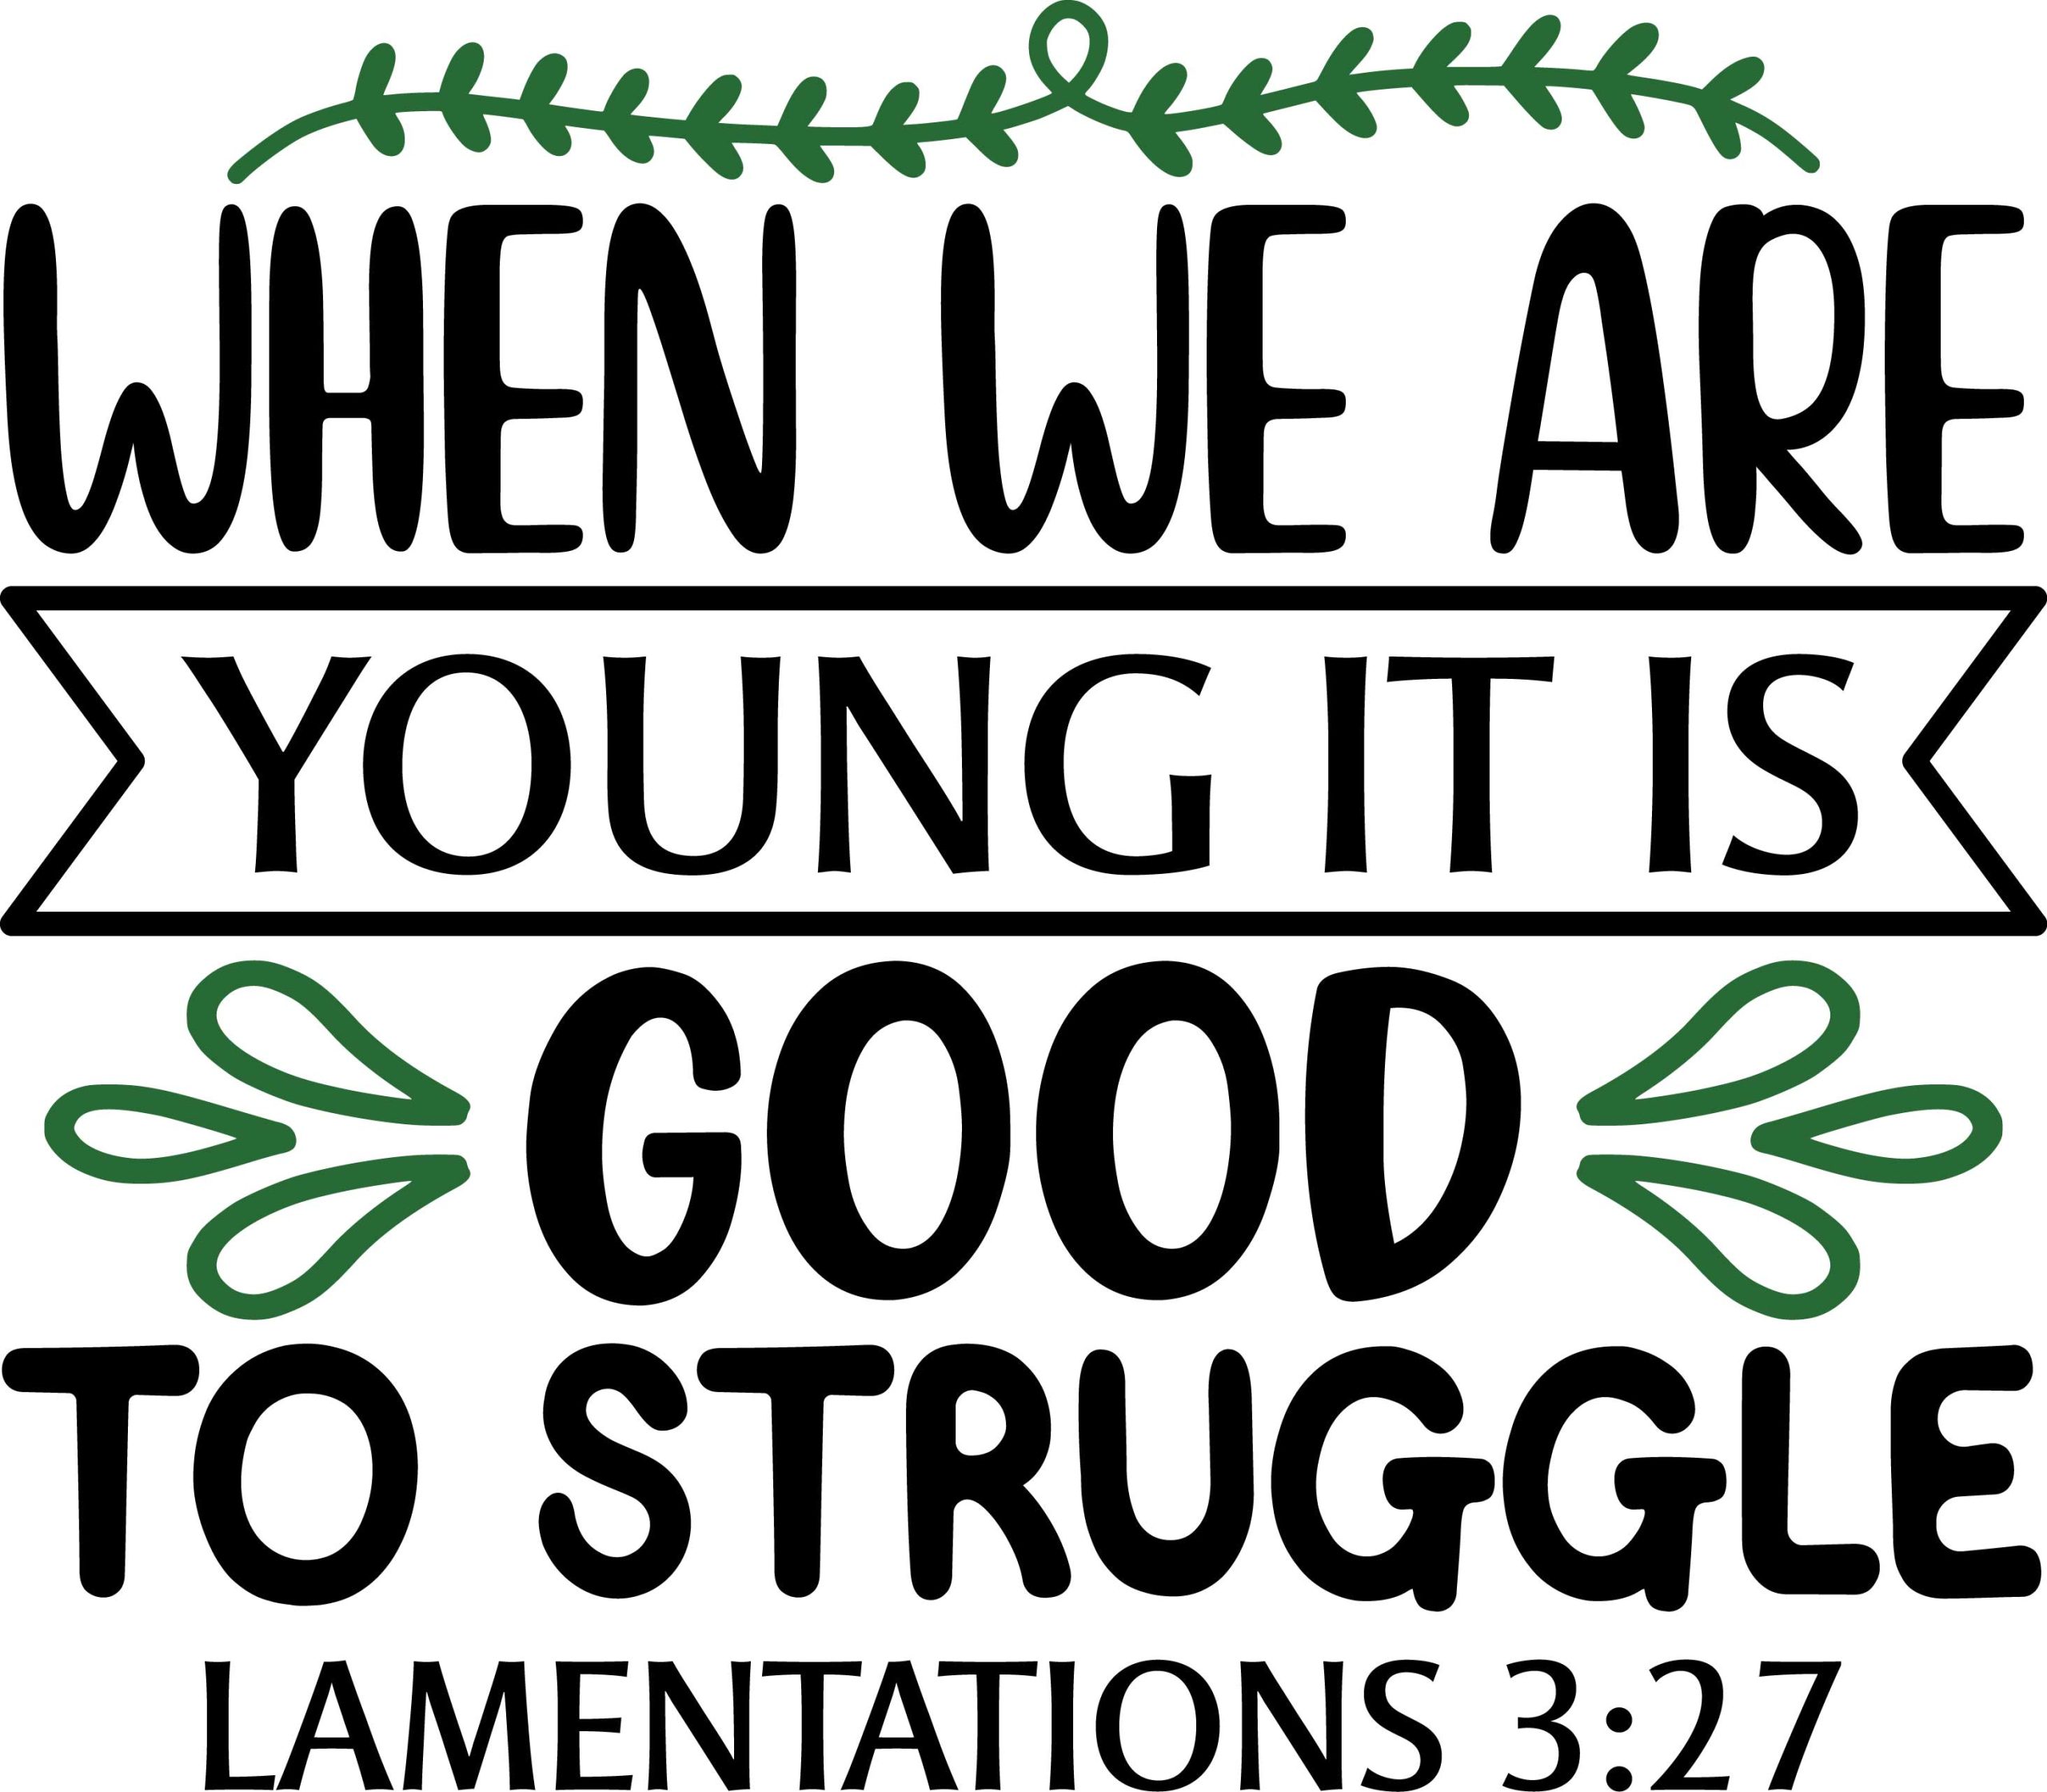 When we are young it is good to struggle lamentations 3:27, bible verses, scripture verses, svg files, passages, sayings, cricut designs, silhouette, embroidery, bundle, free cut files, design space, vector